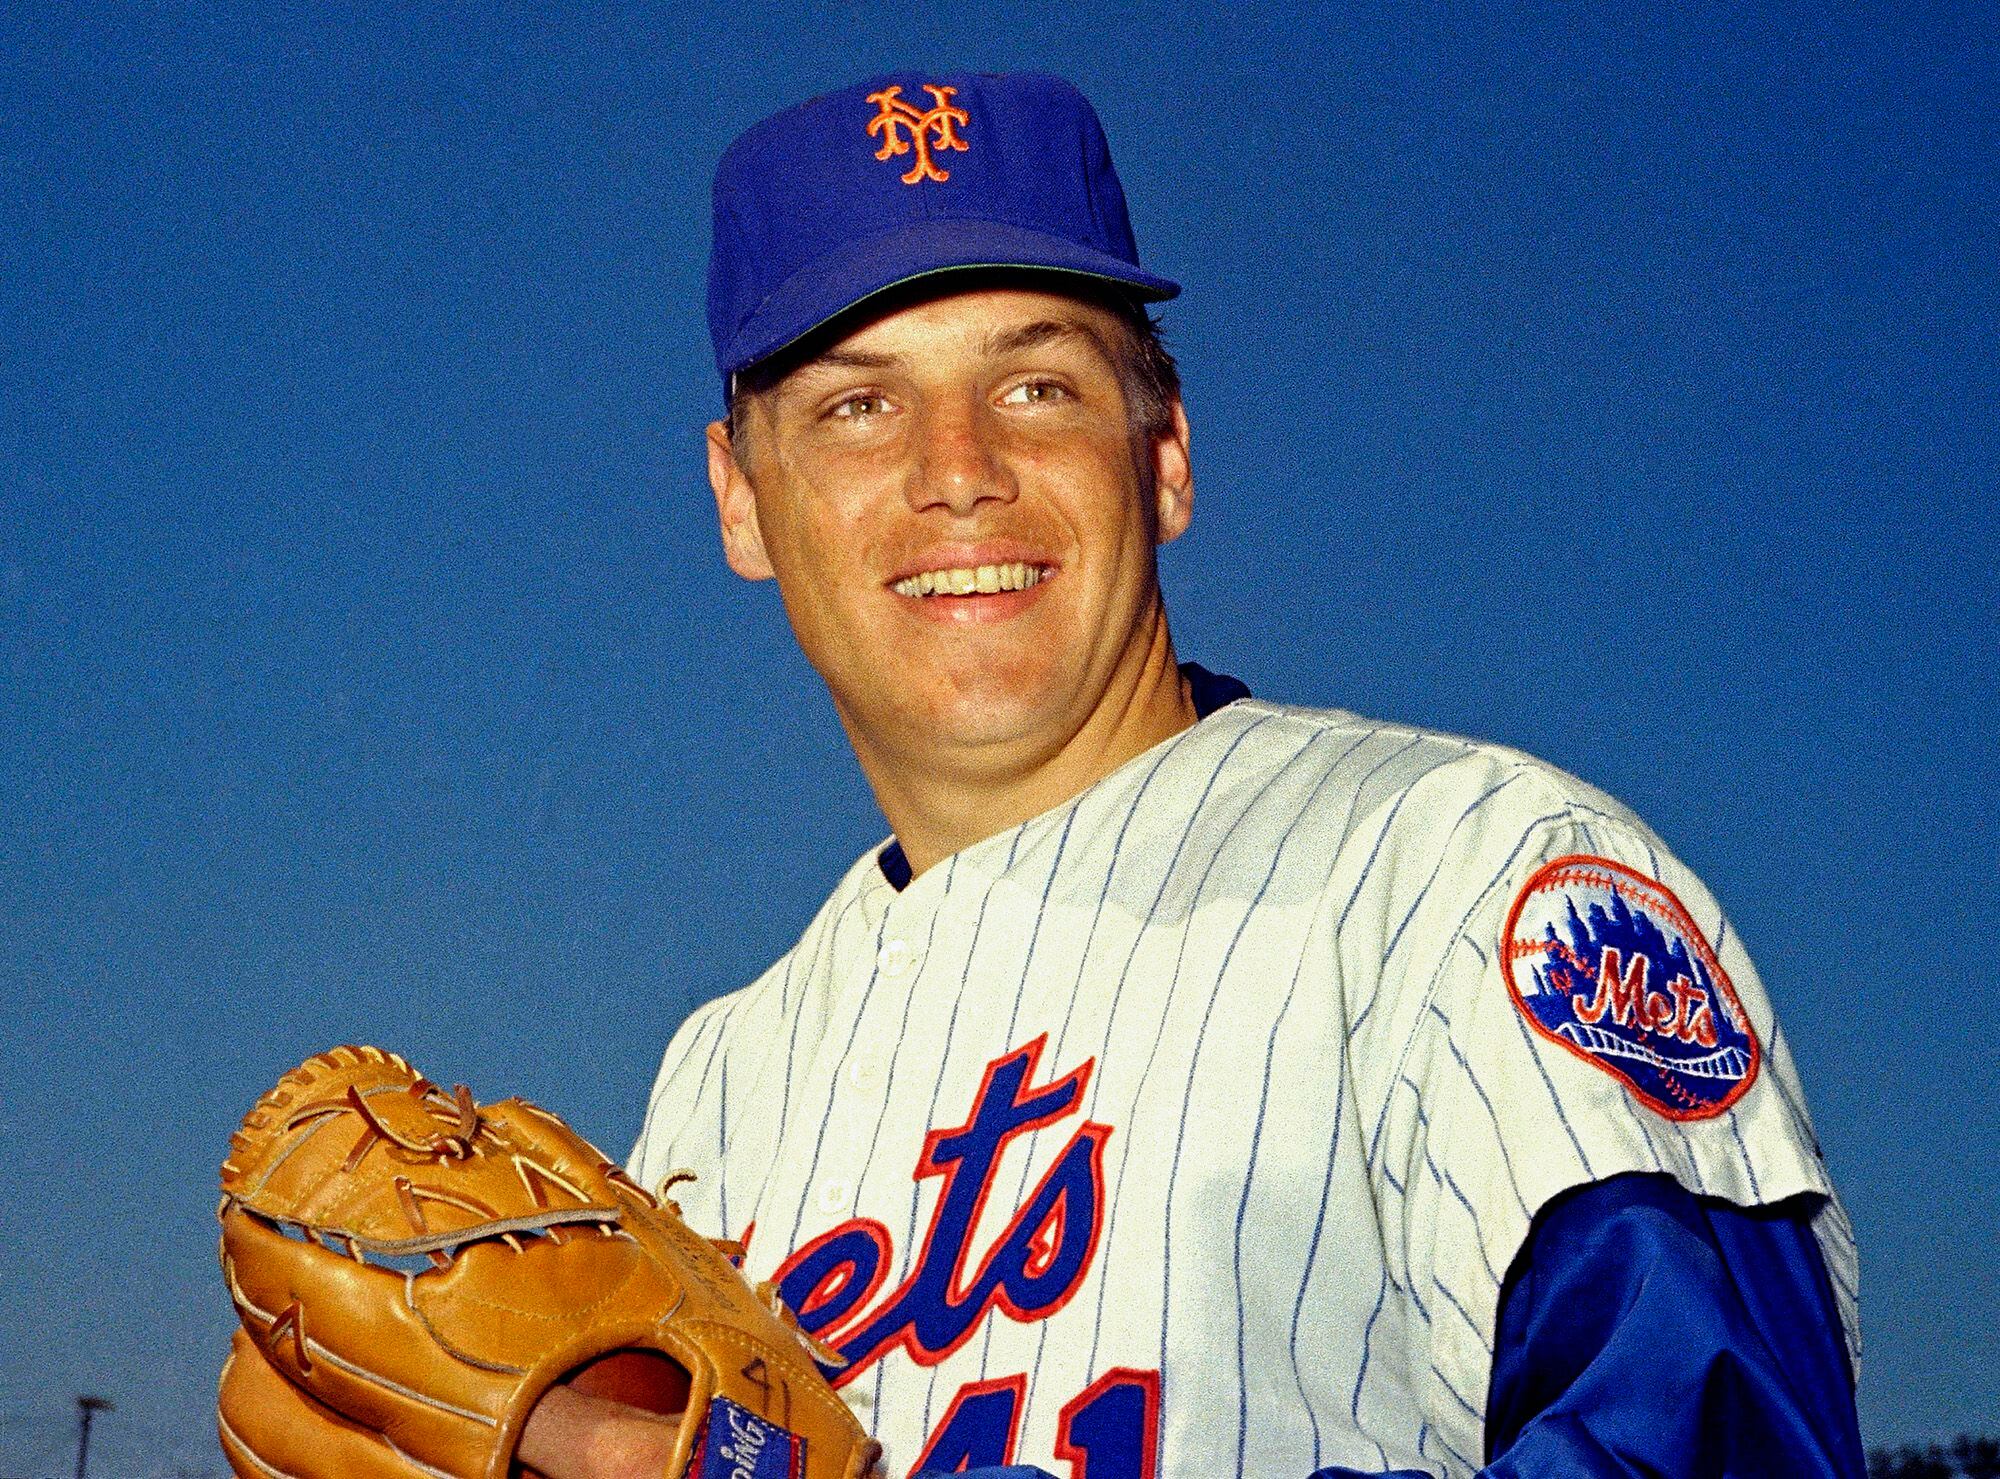 Mets History: 41 years ago today, #41, Tom Seaver, was traded